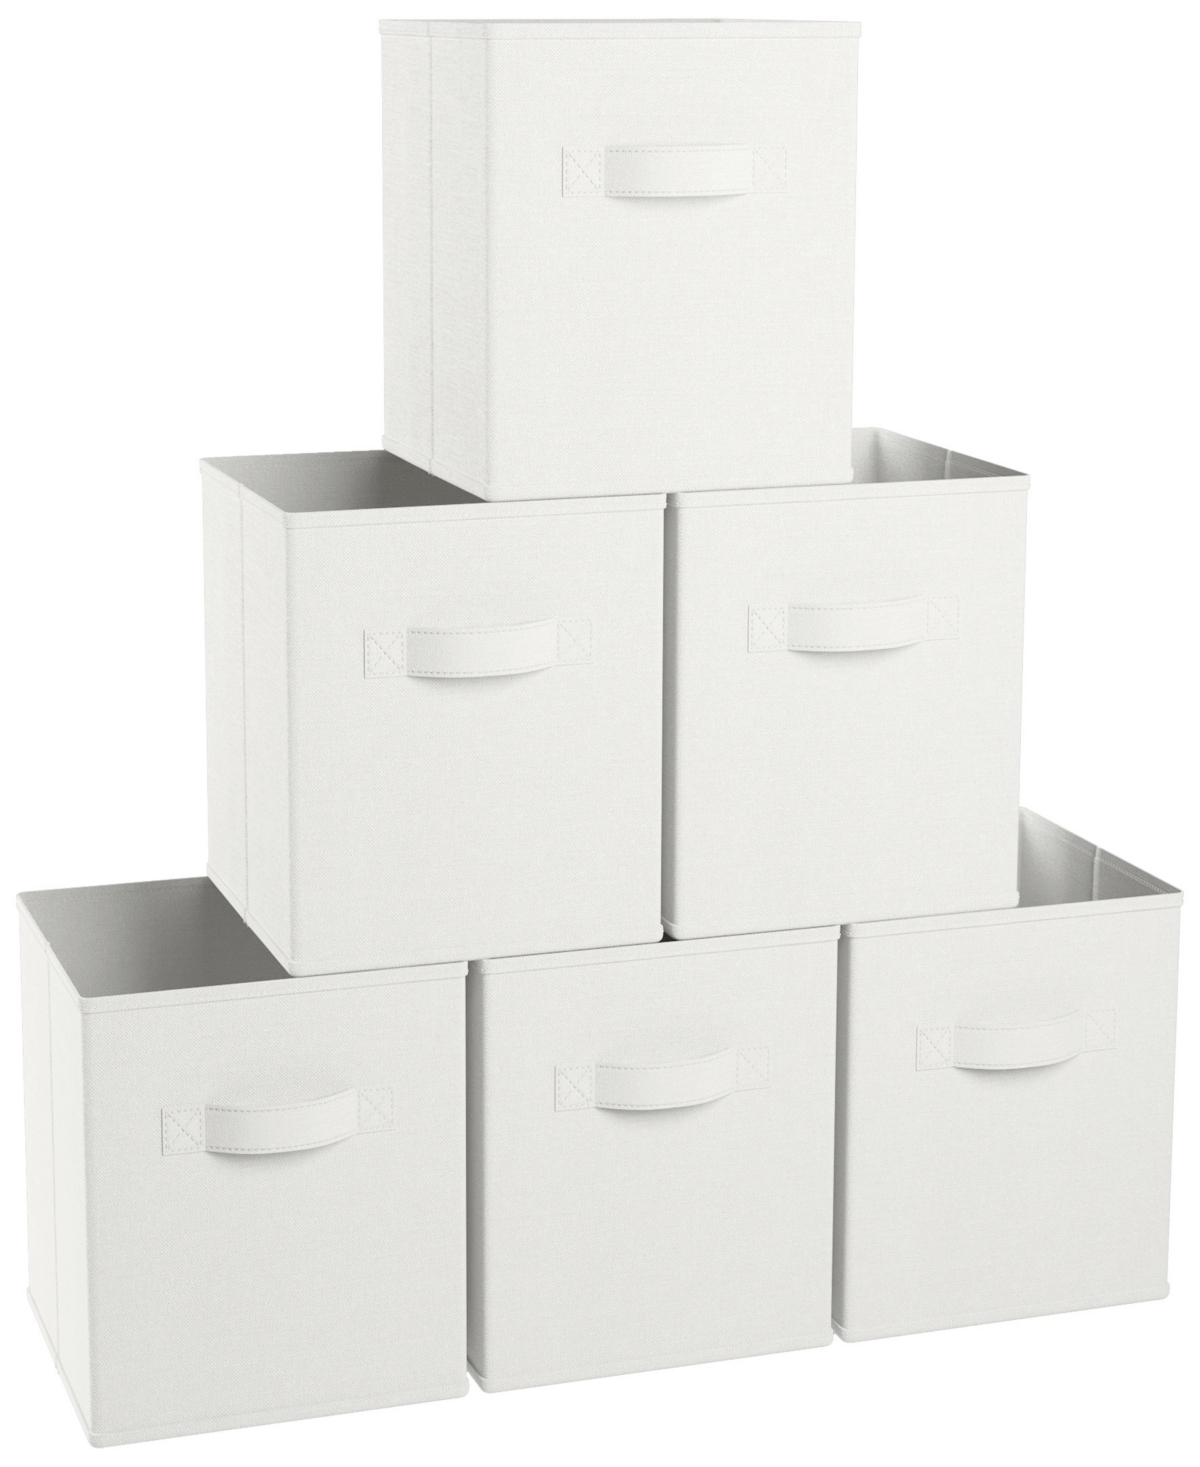 Ornavo Home Foldable Storage Cube Bin With Dual Handles- Set Of 6 In White